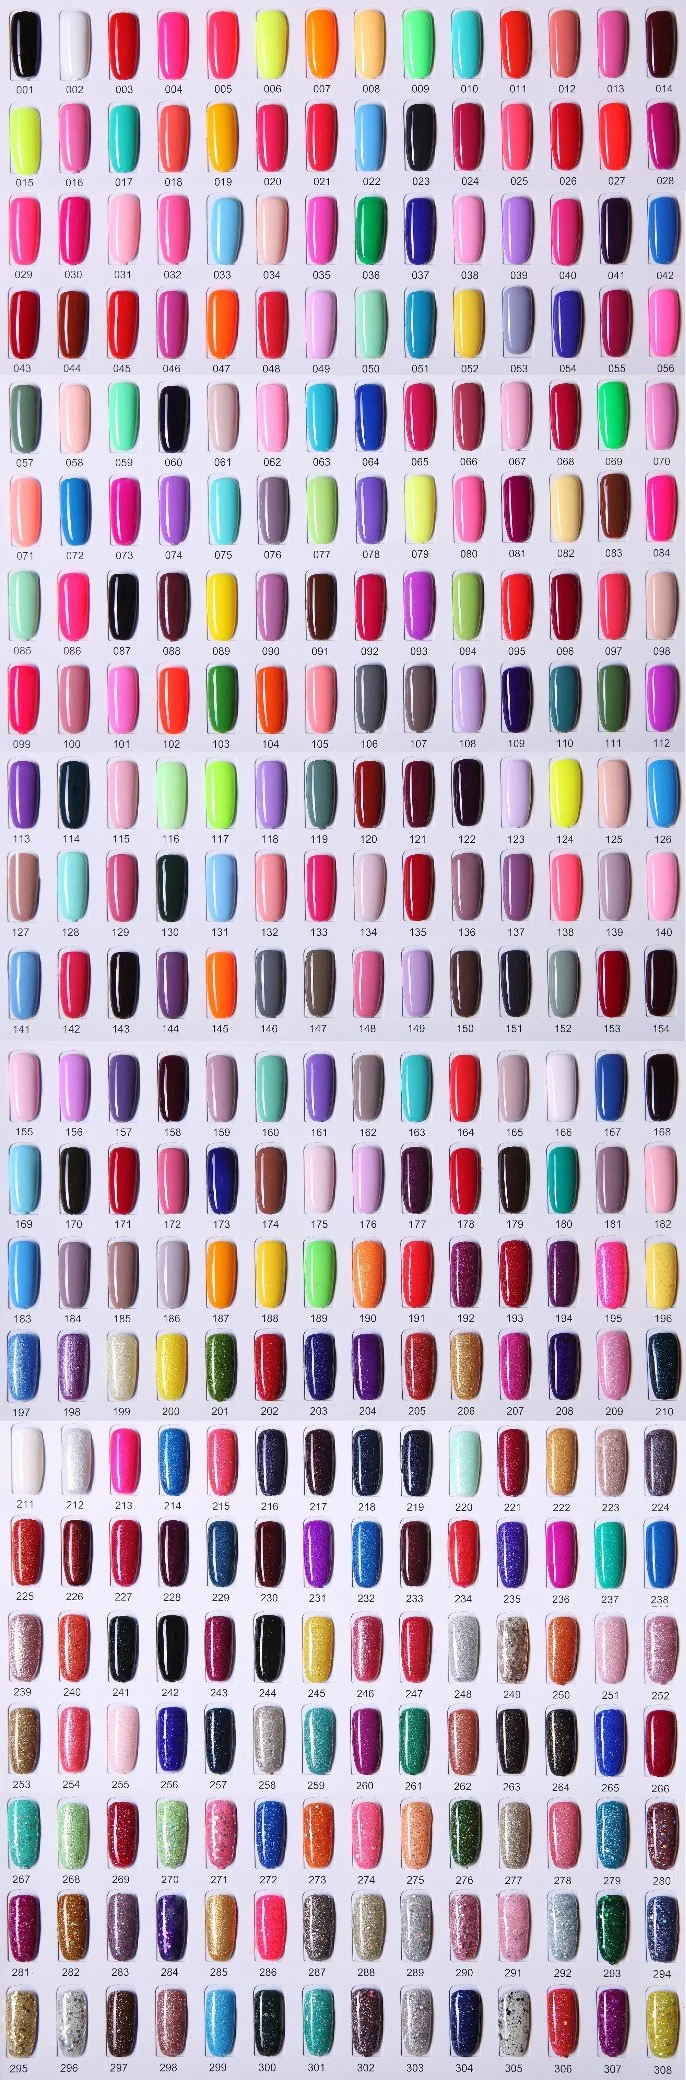 3 Step UV/LED Nail Gel Polish with Factory Price and Offering OEM/ODM Service